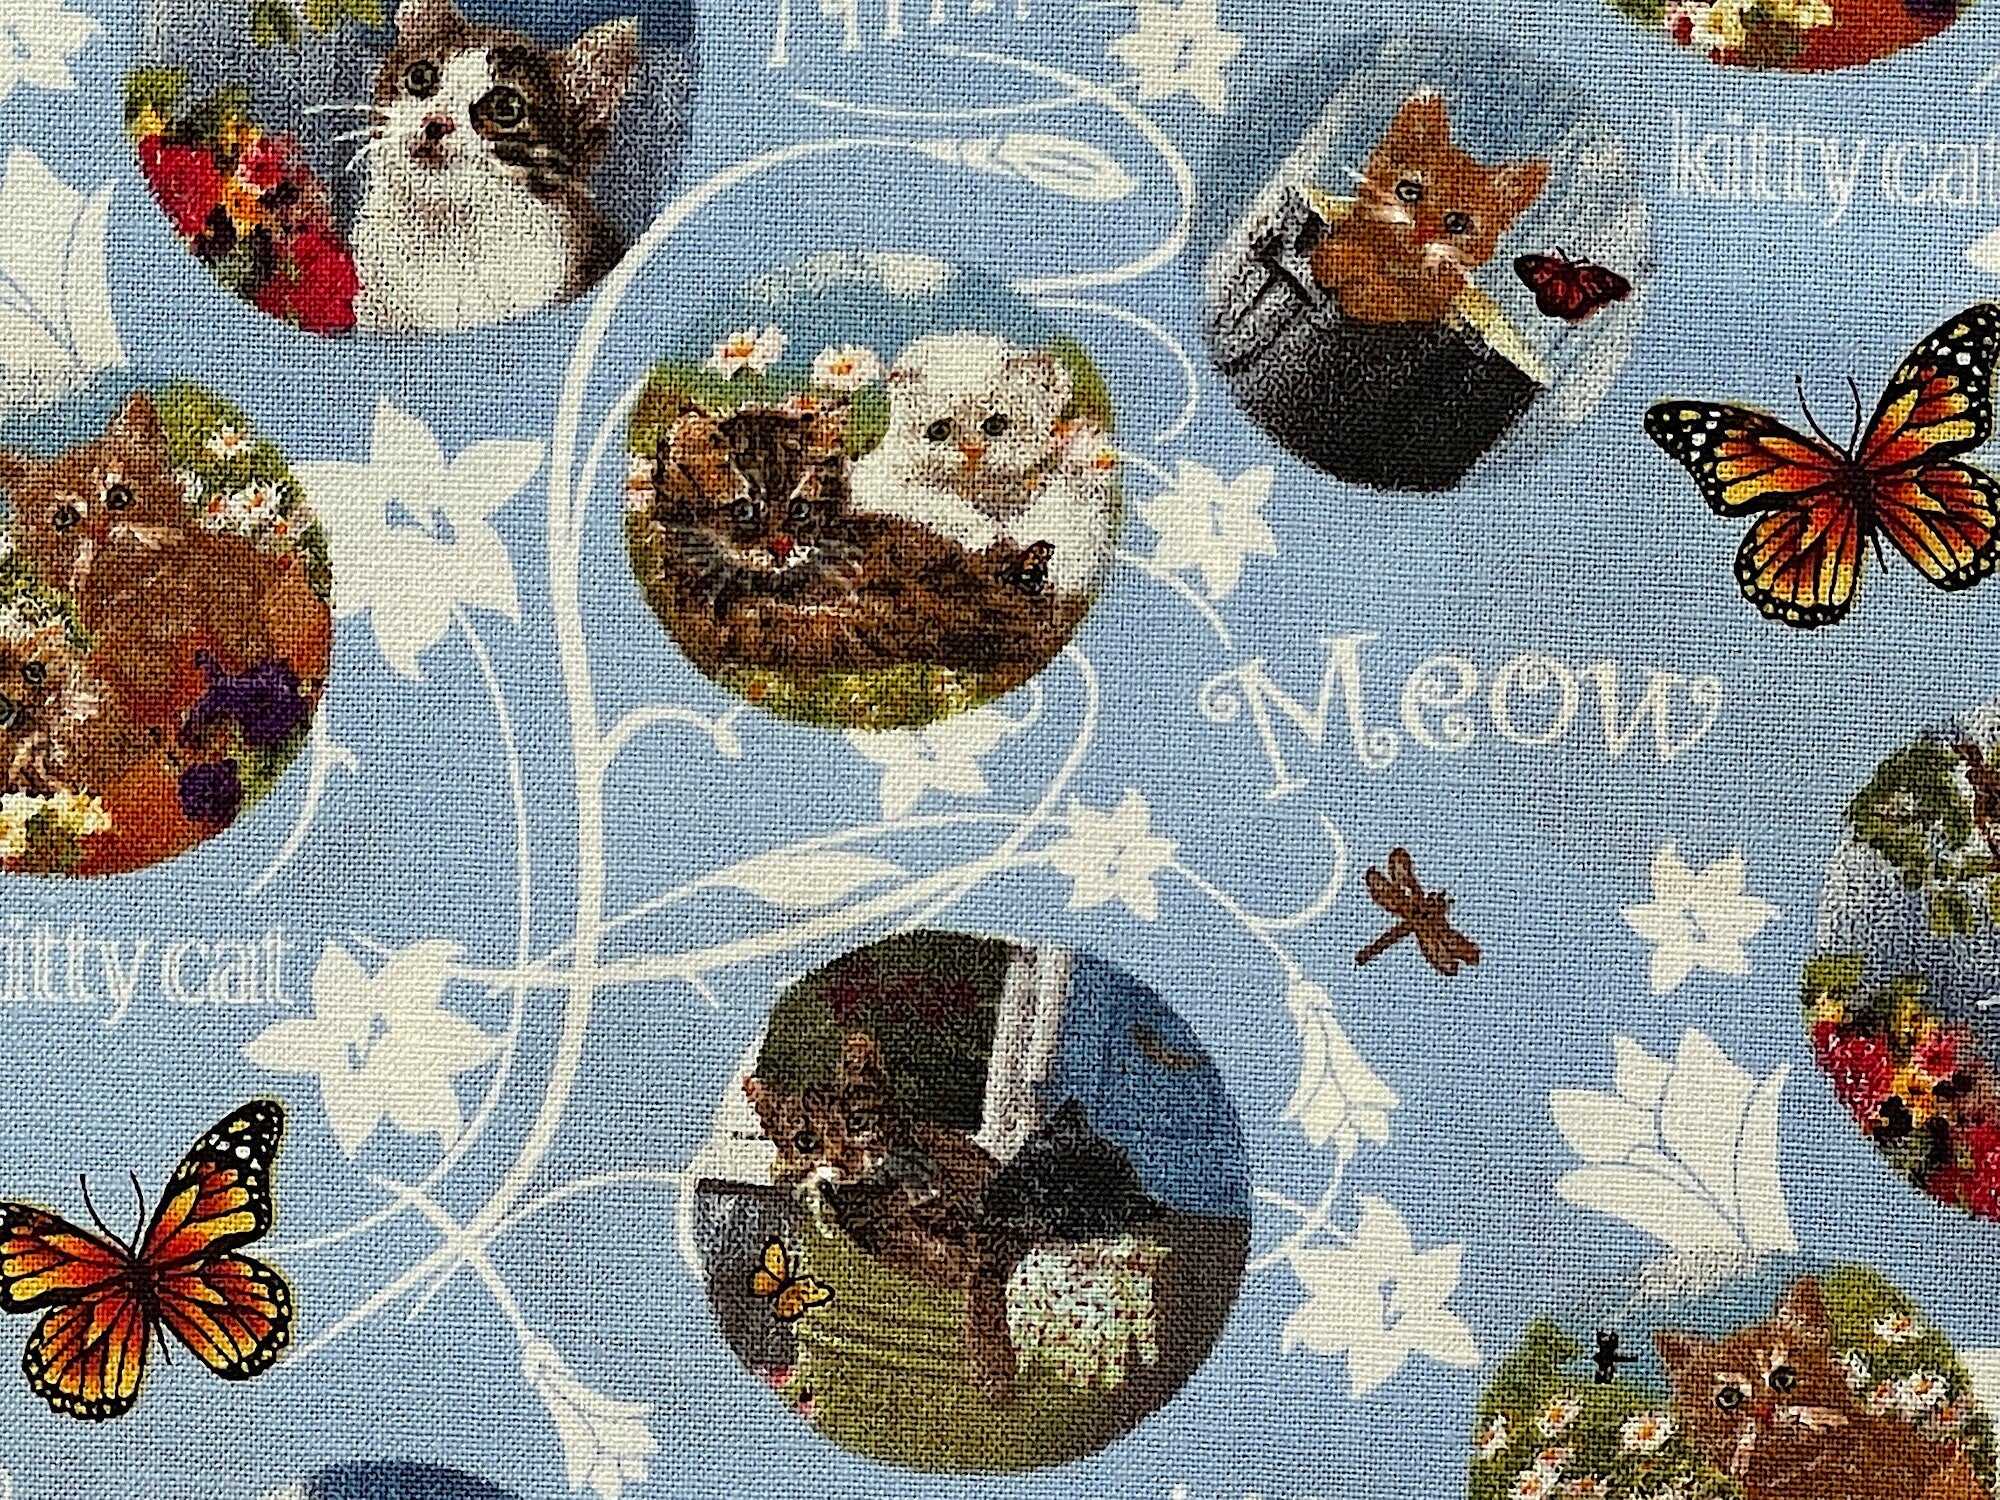 Close up of cats, butterflies and flowers.